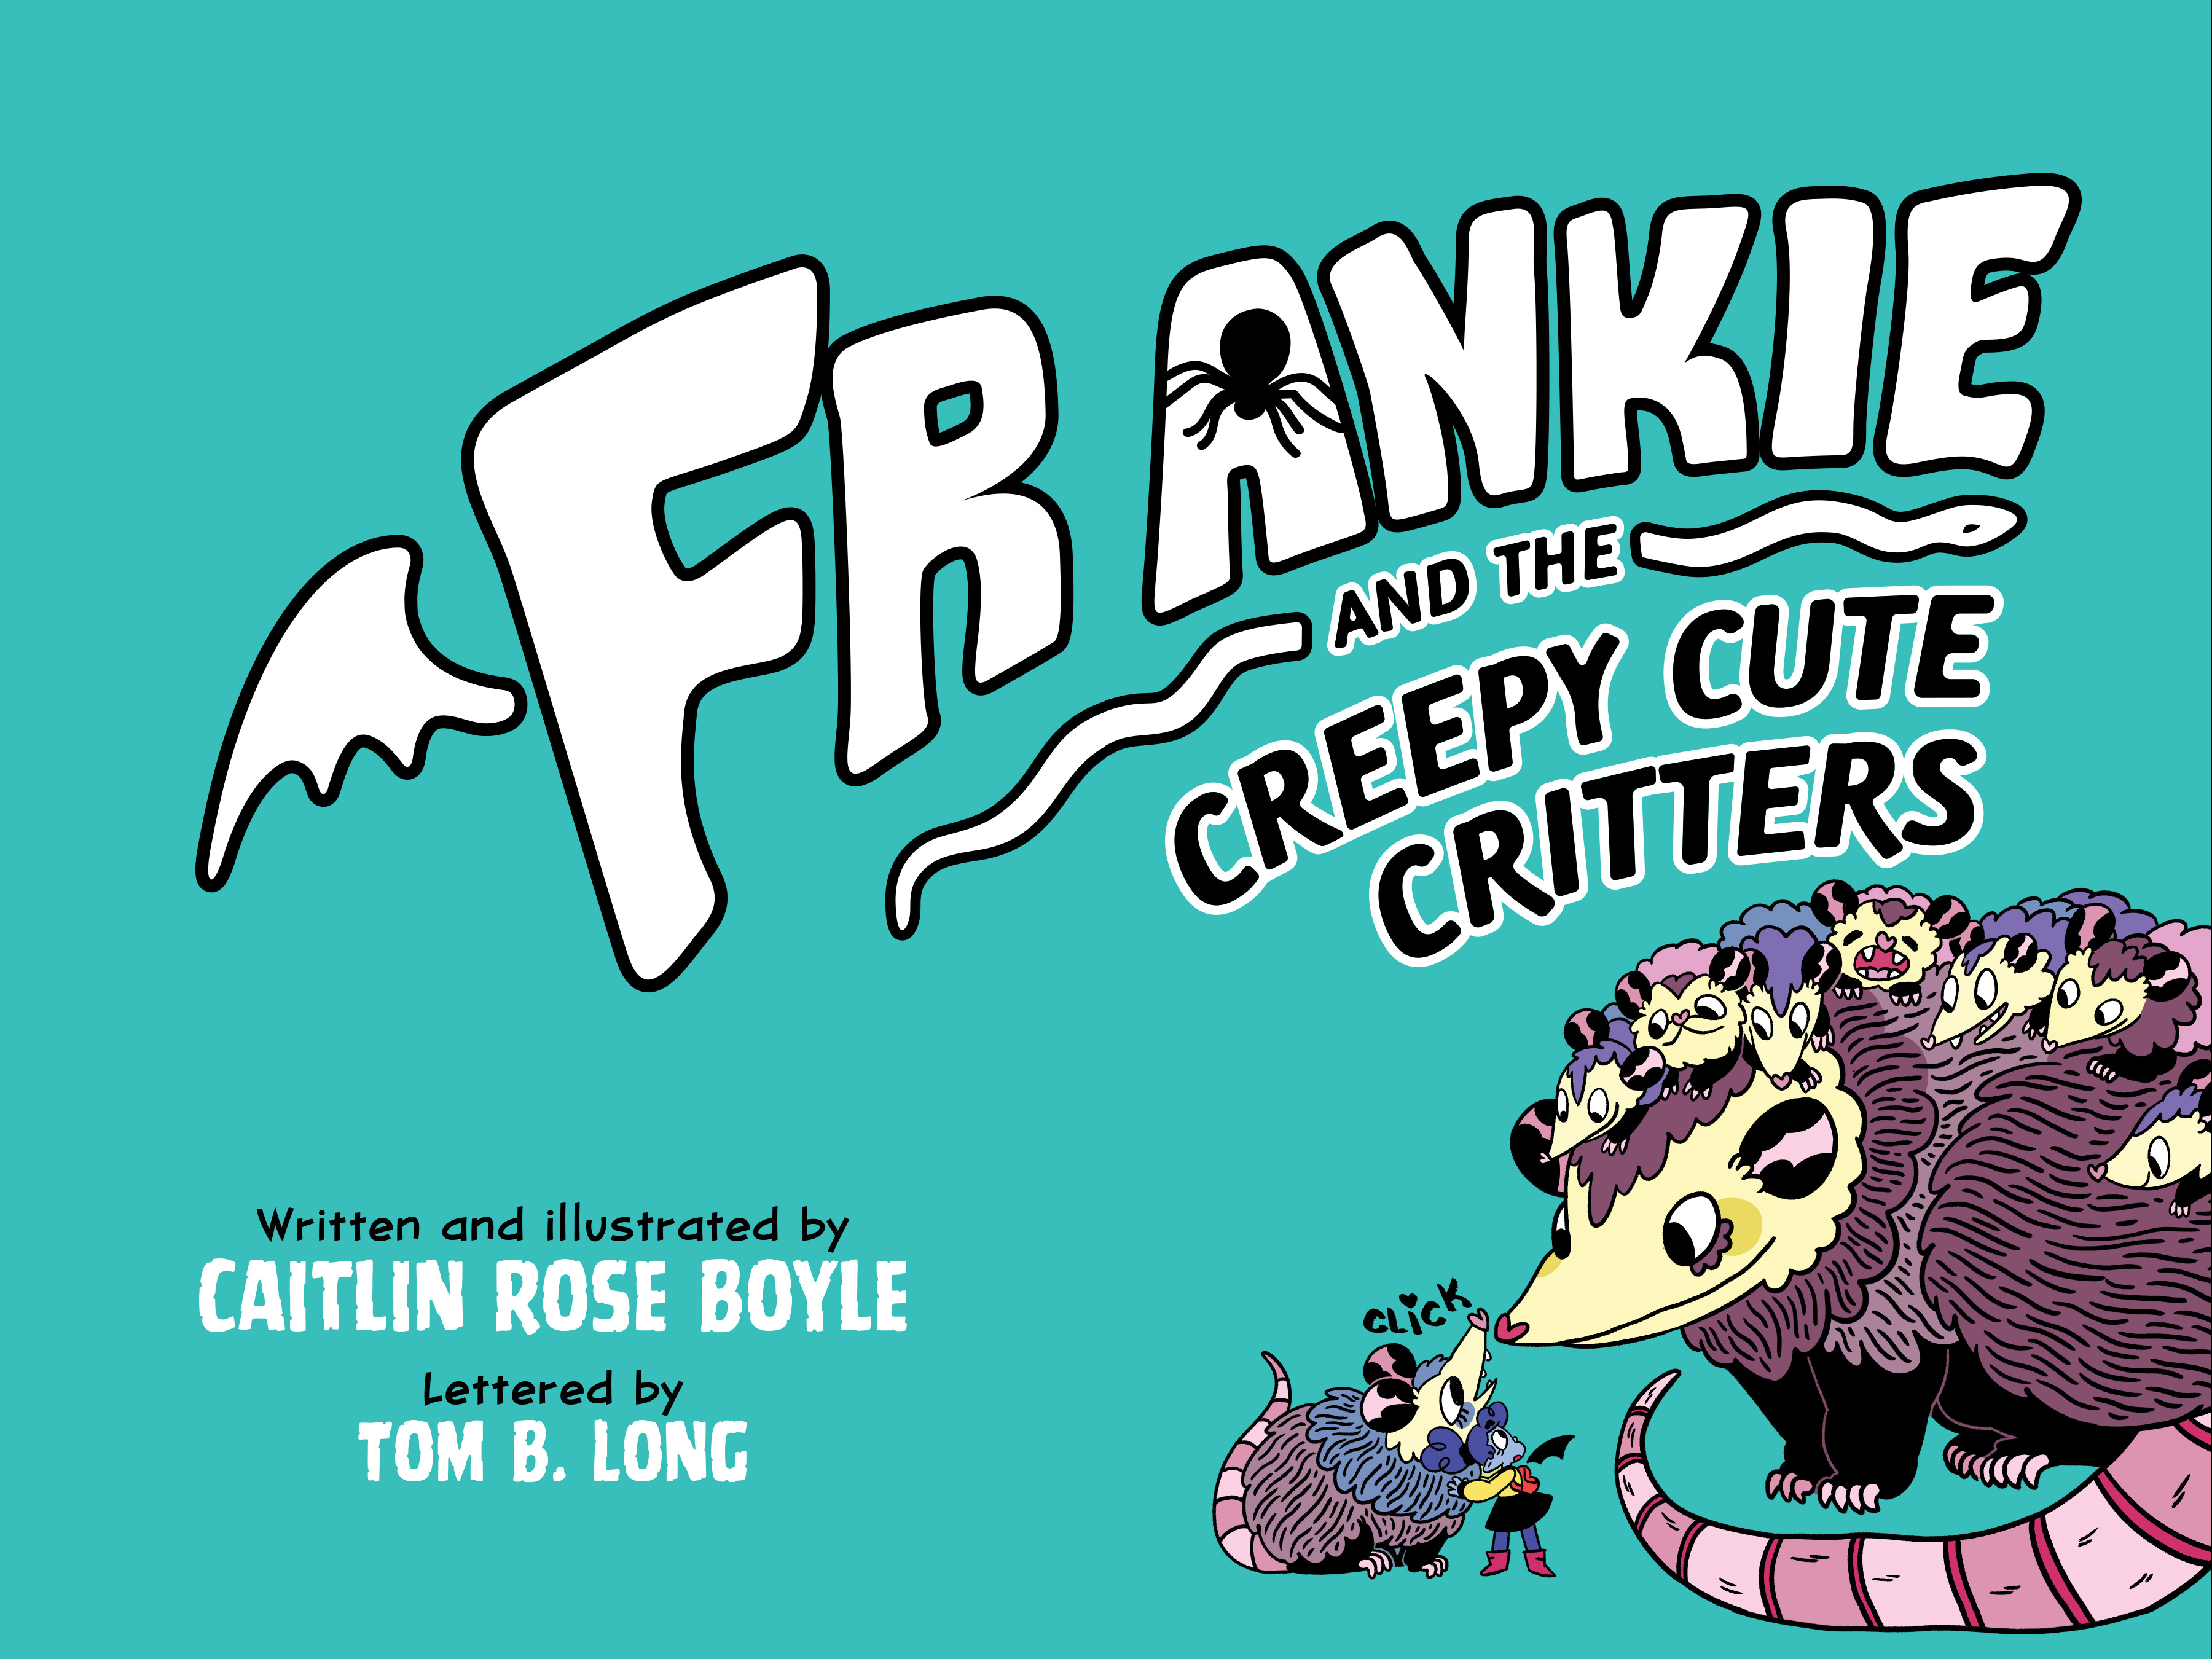 Read online Frankie and the Creepy Cute Critters comic -  Issue # Full - 3